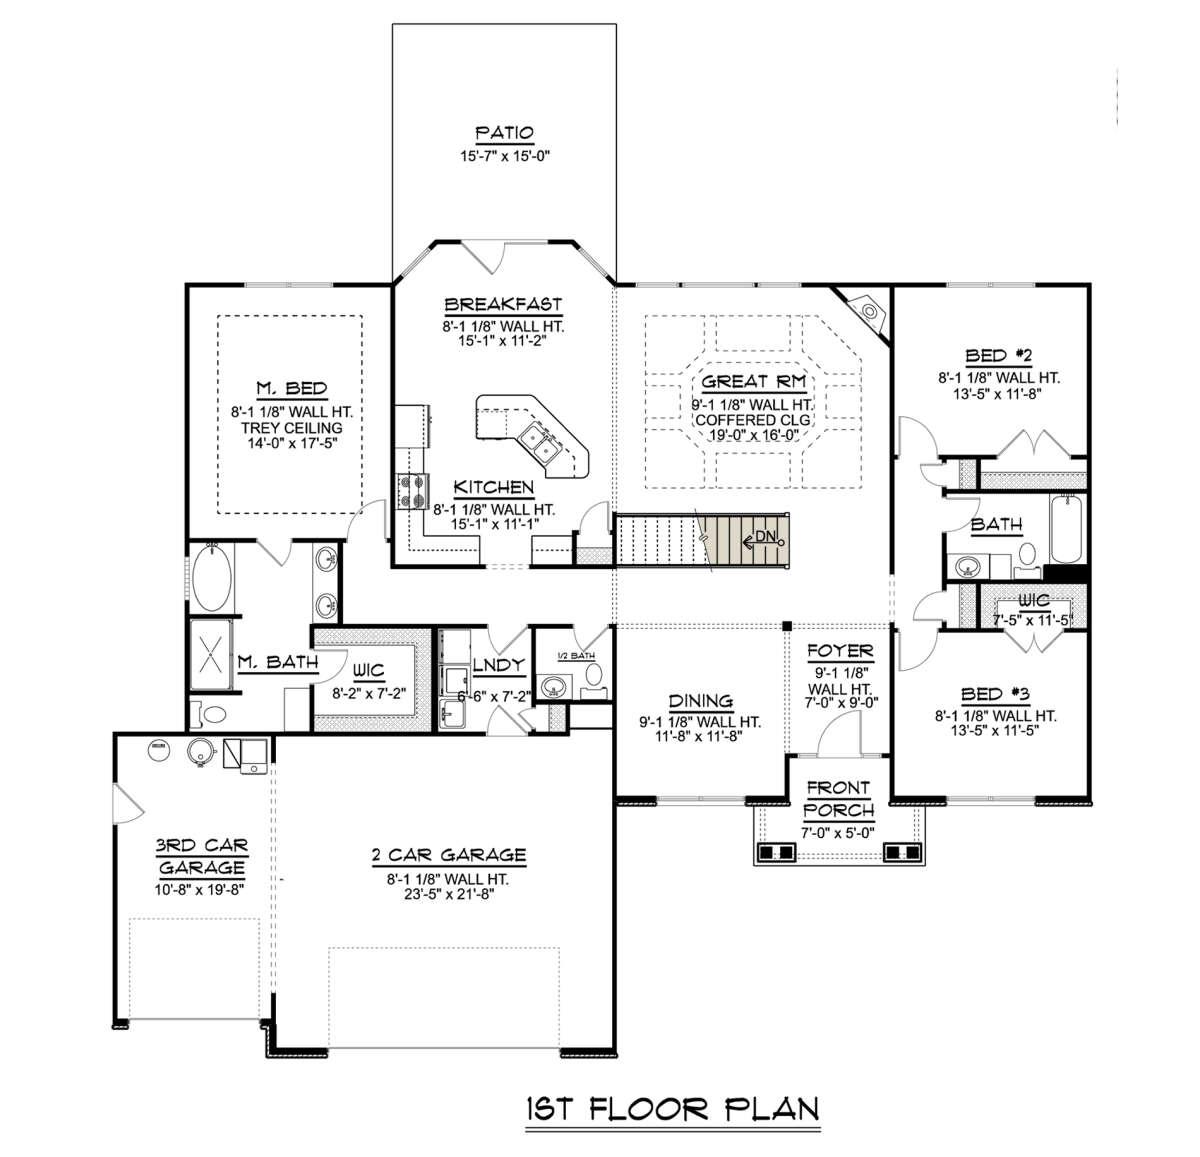 Main Floor w/ Basement Stair Location for House Plan #5032-00030